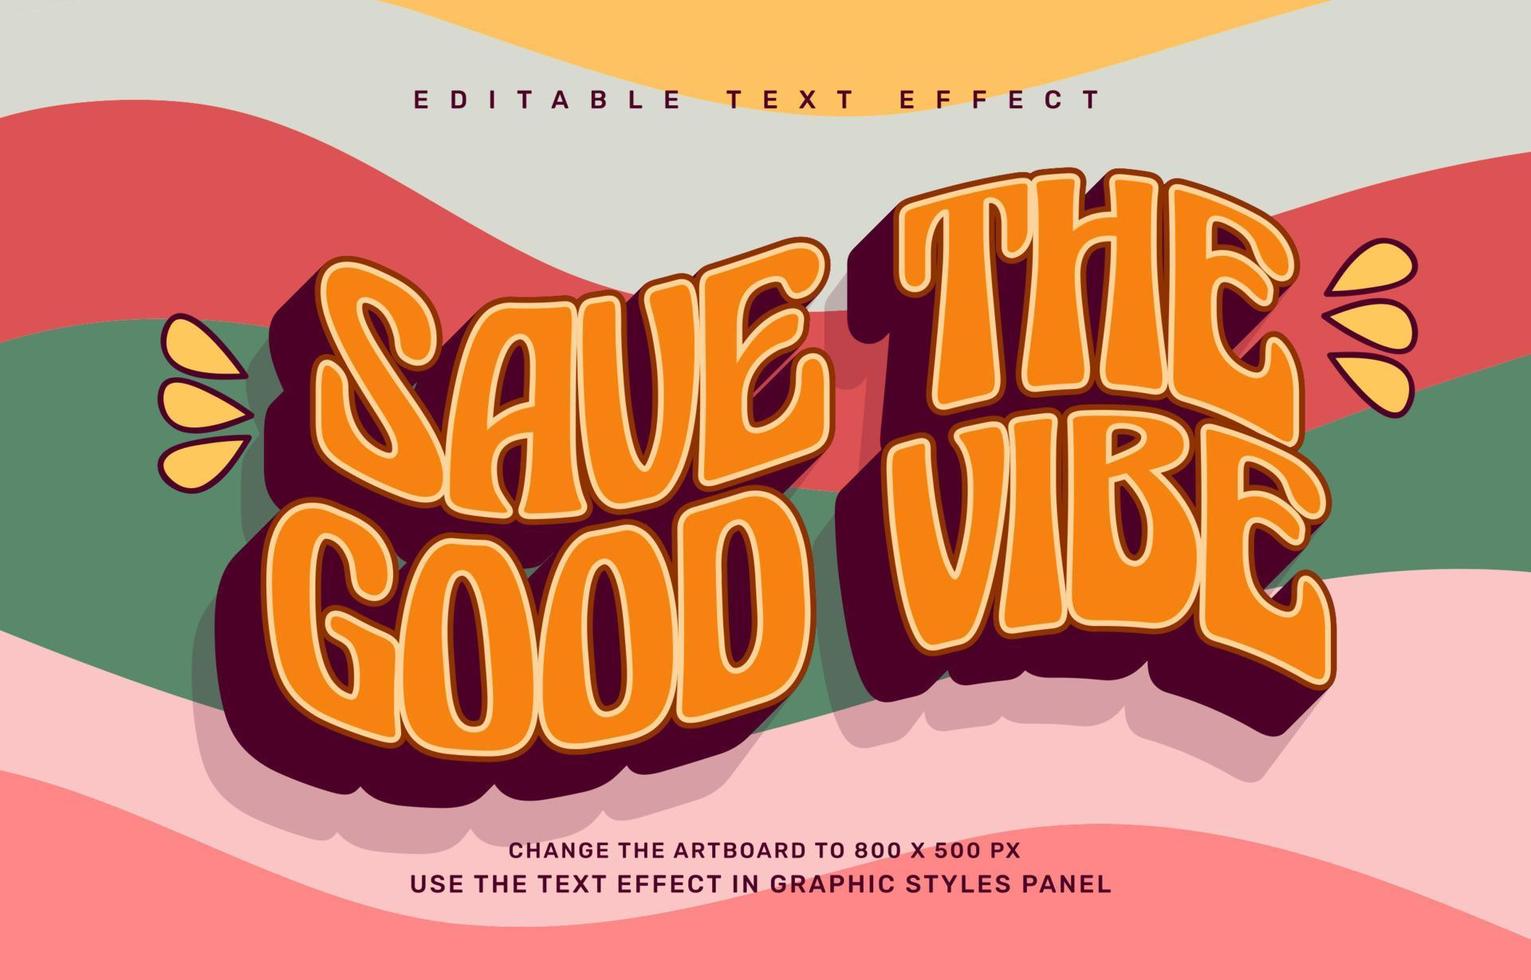 Save the good vibe, groovy quote editable text effect template vector